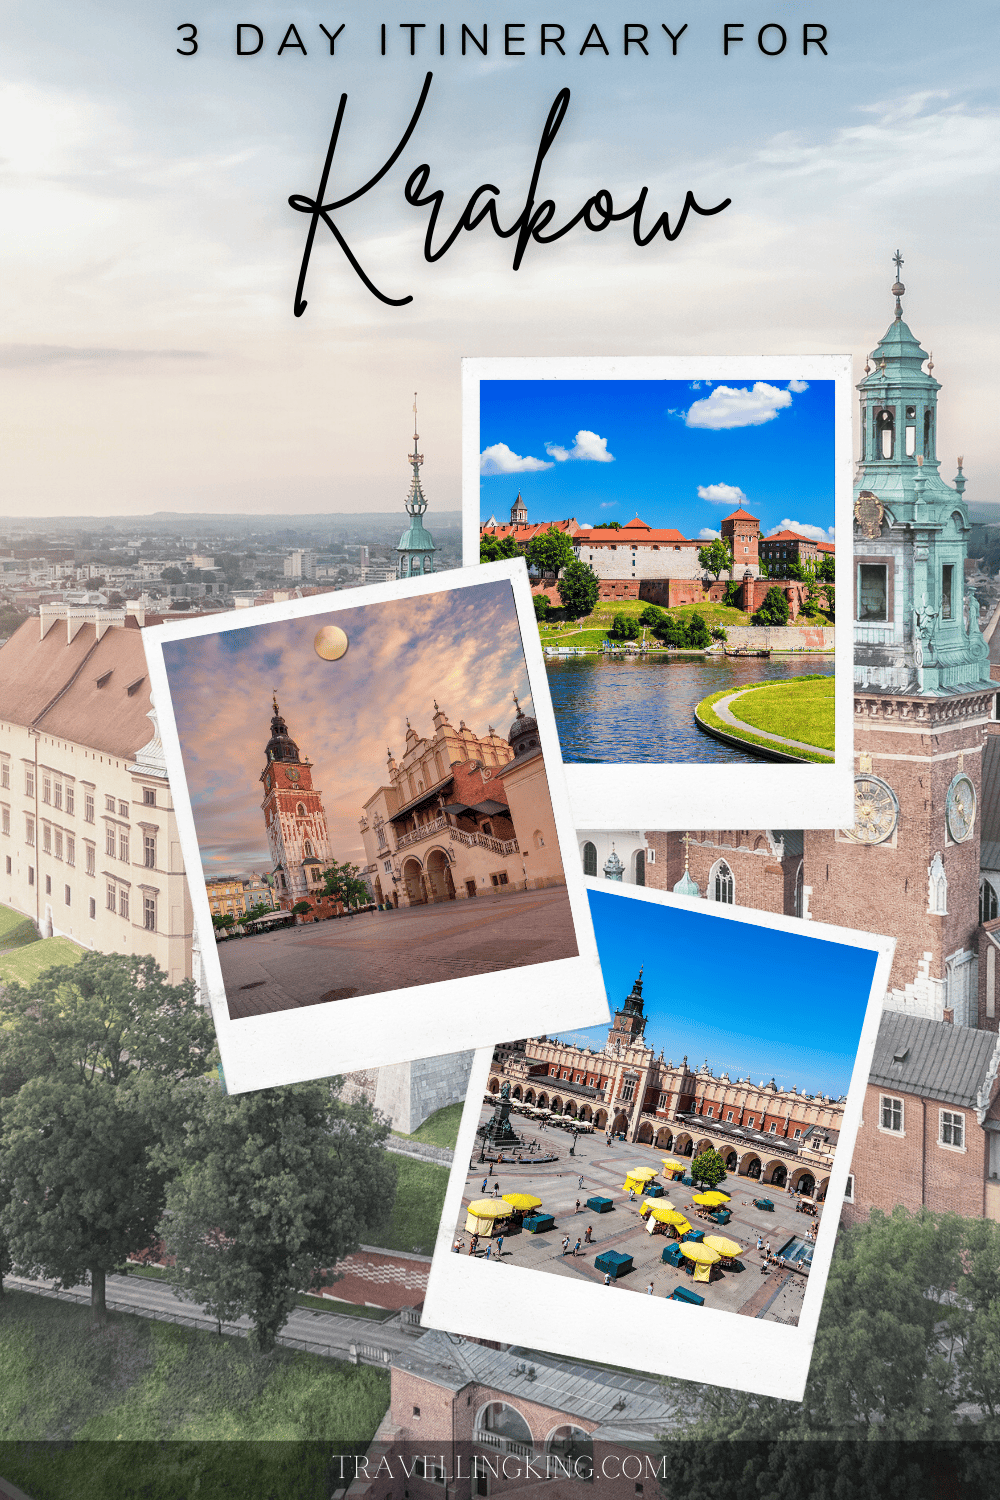 3 Days itinerary for Krakow